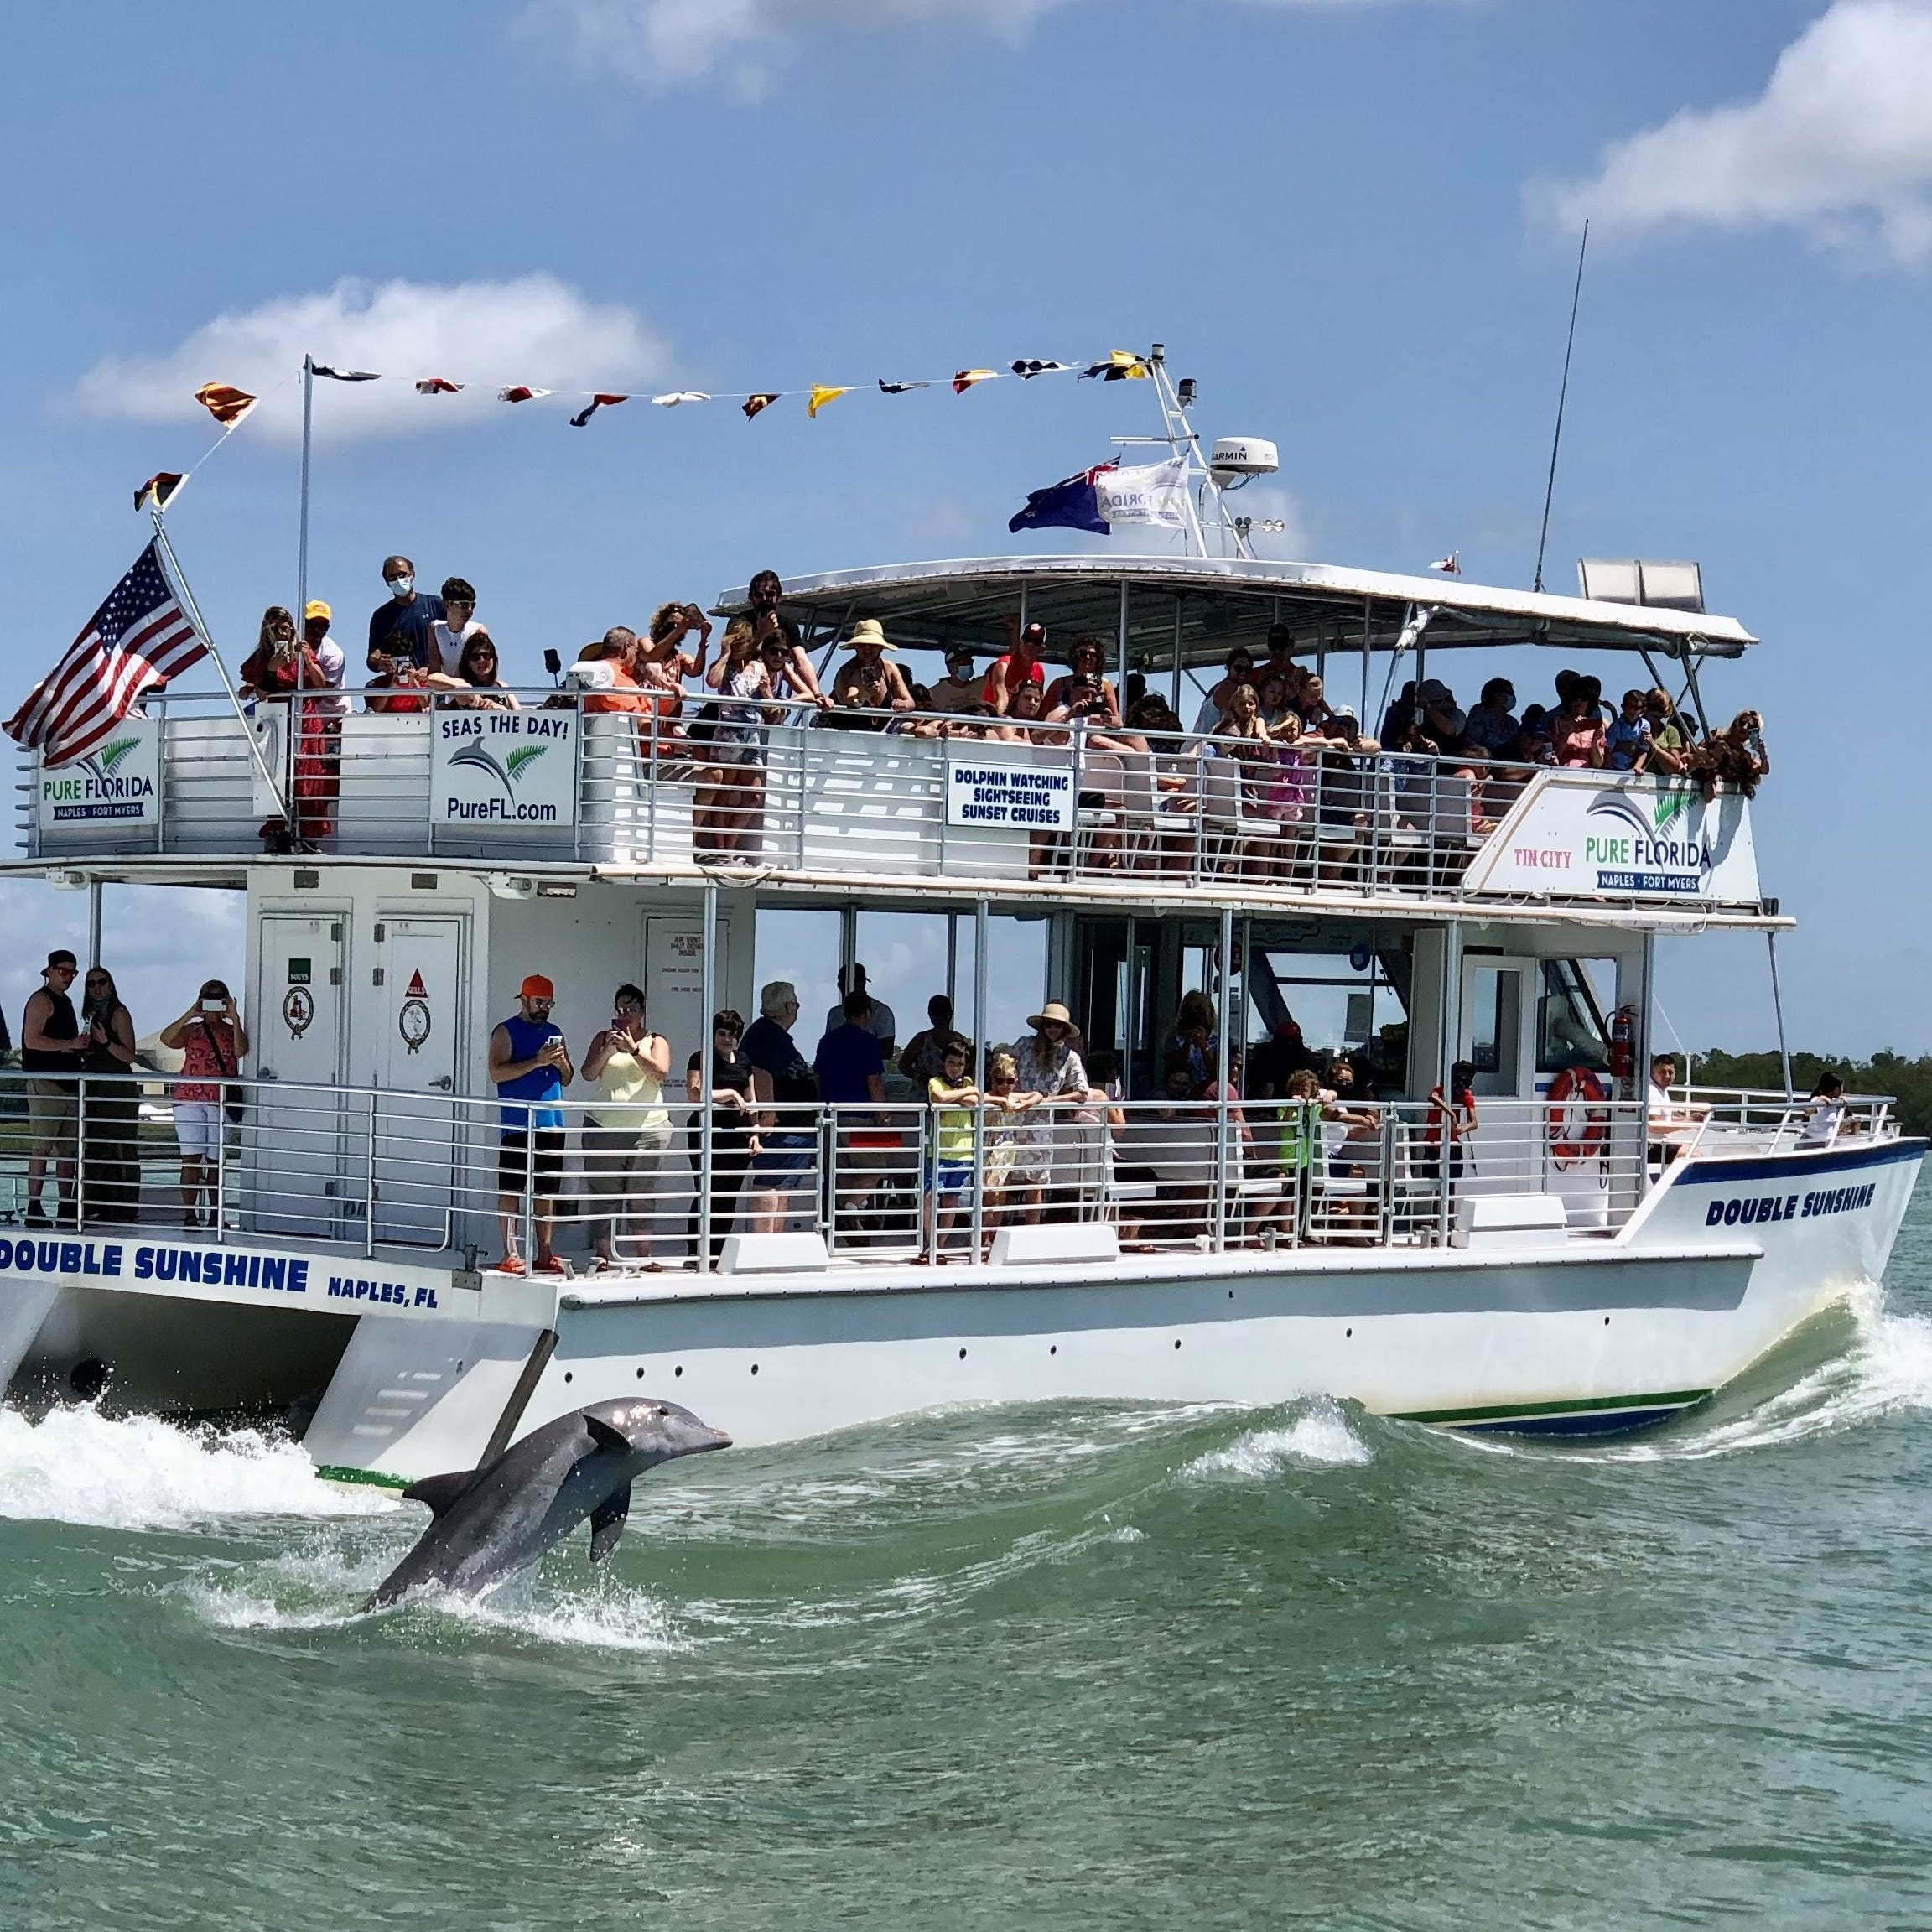 Pure Florida offers sightseeing cruises.